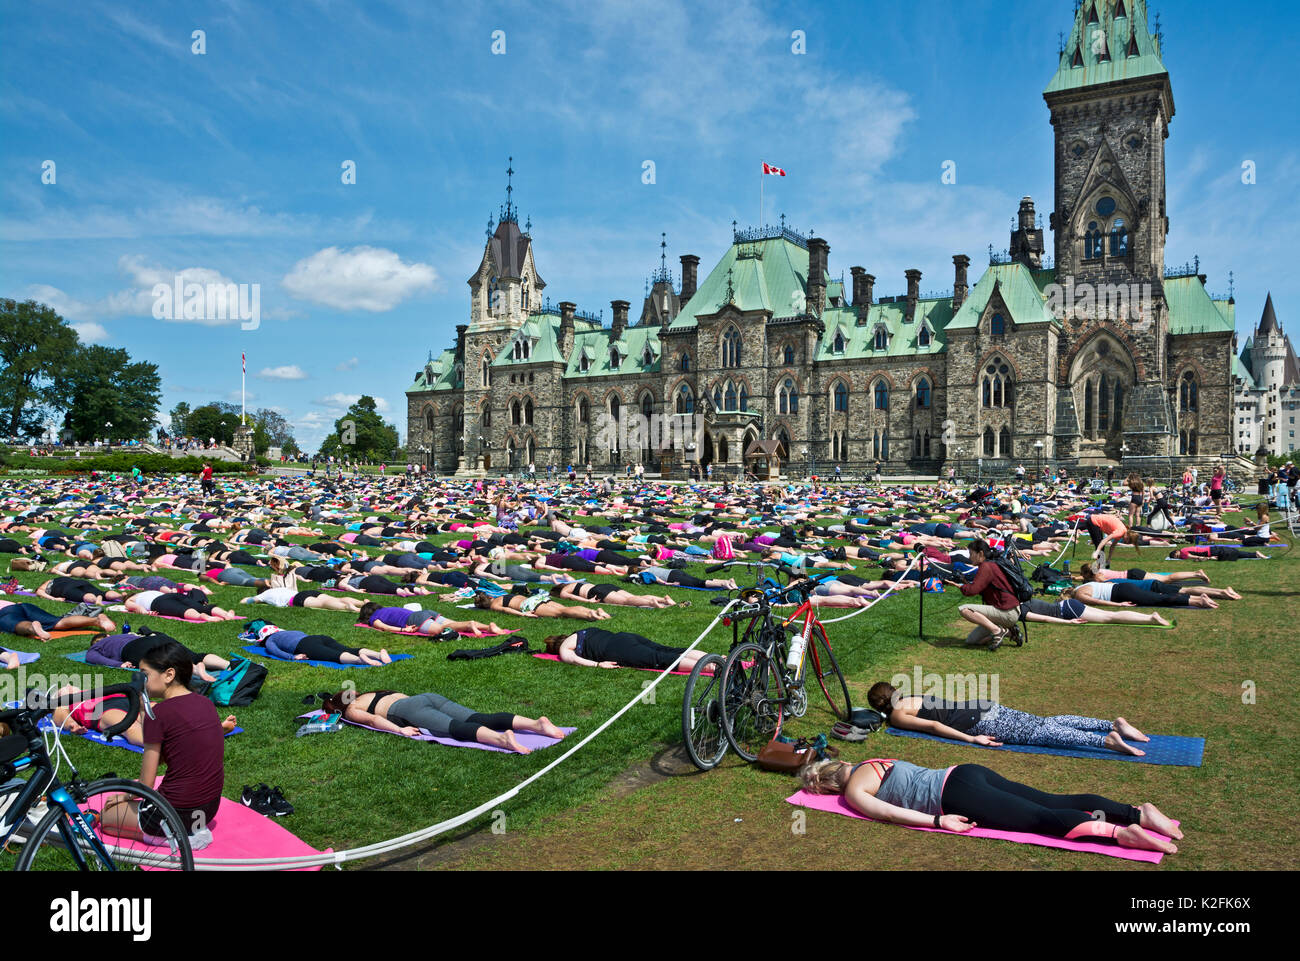 Weekly free group yoga on Parliament Hill in Ottawa, Canada, summer 2017. Canada's Parlament buildings Ottawa. Stock Photo